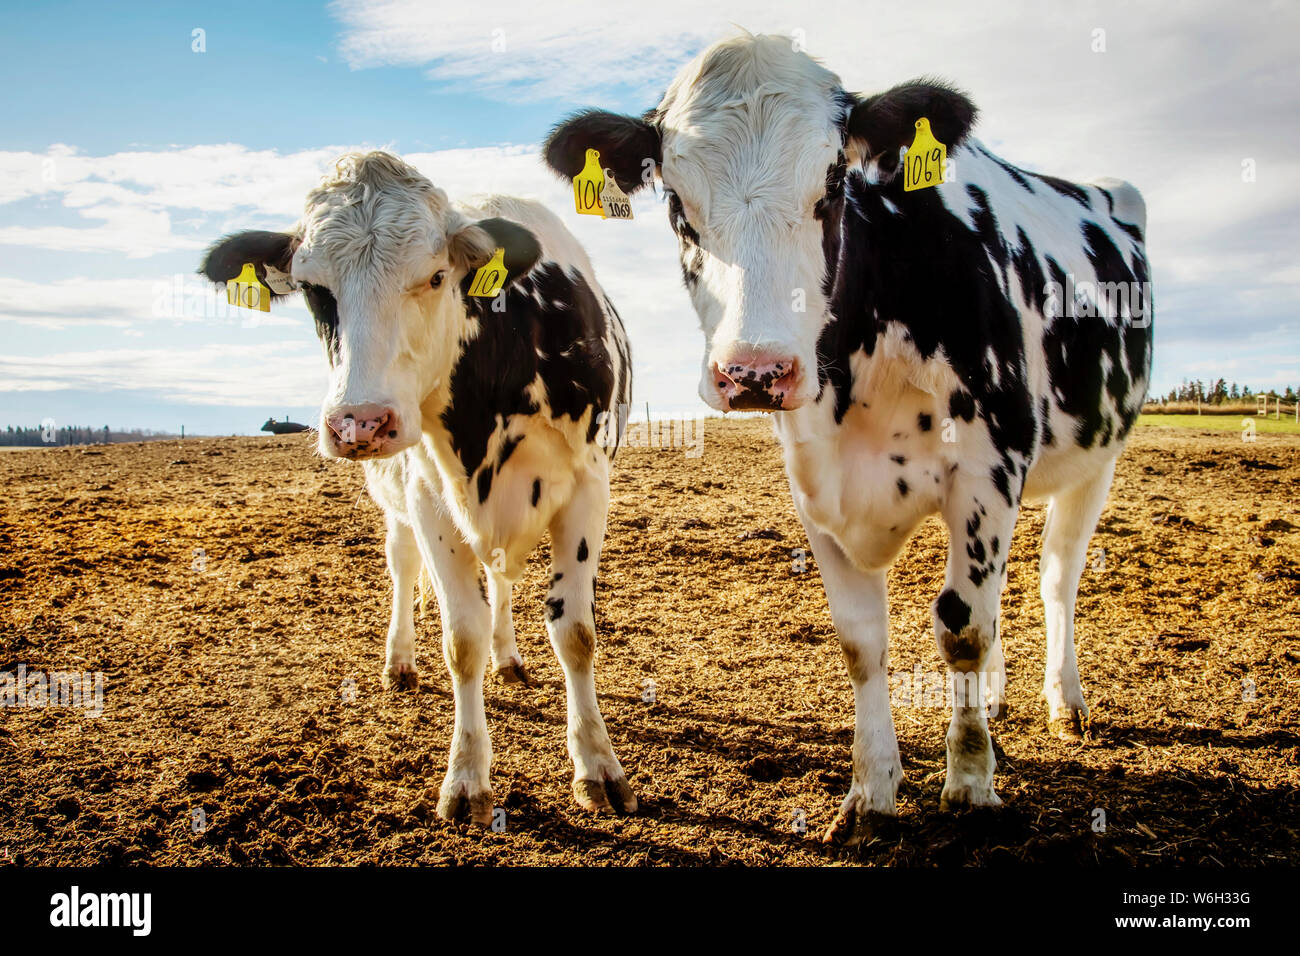 Two young Holstein cows curiously looking at the camera while standing in a corral with identification tags in their ears on a robotic dairy farm, ... Stock Photo